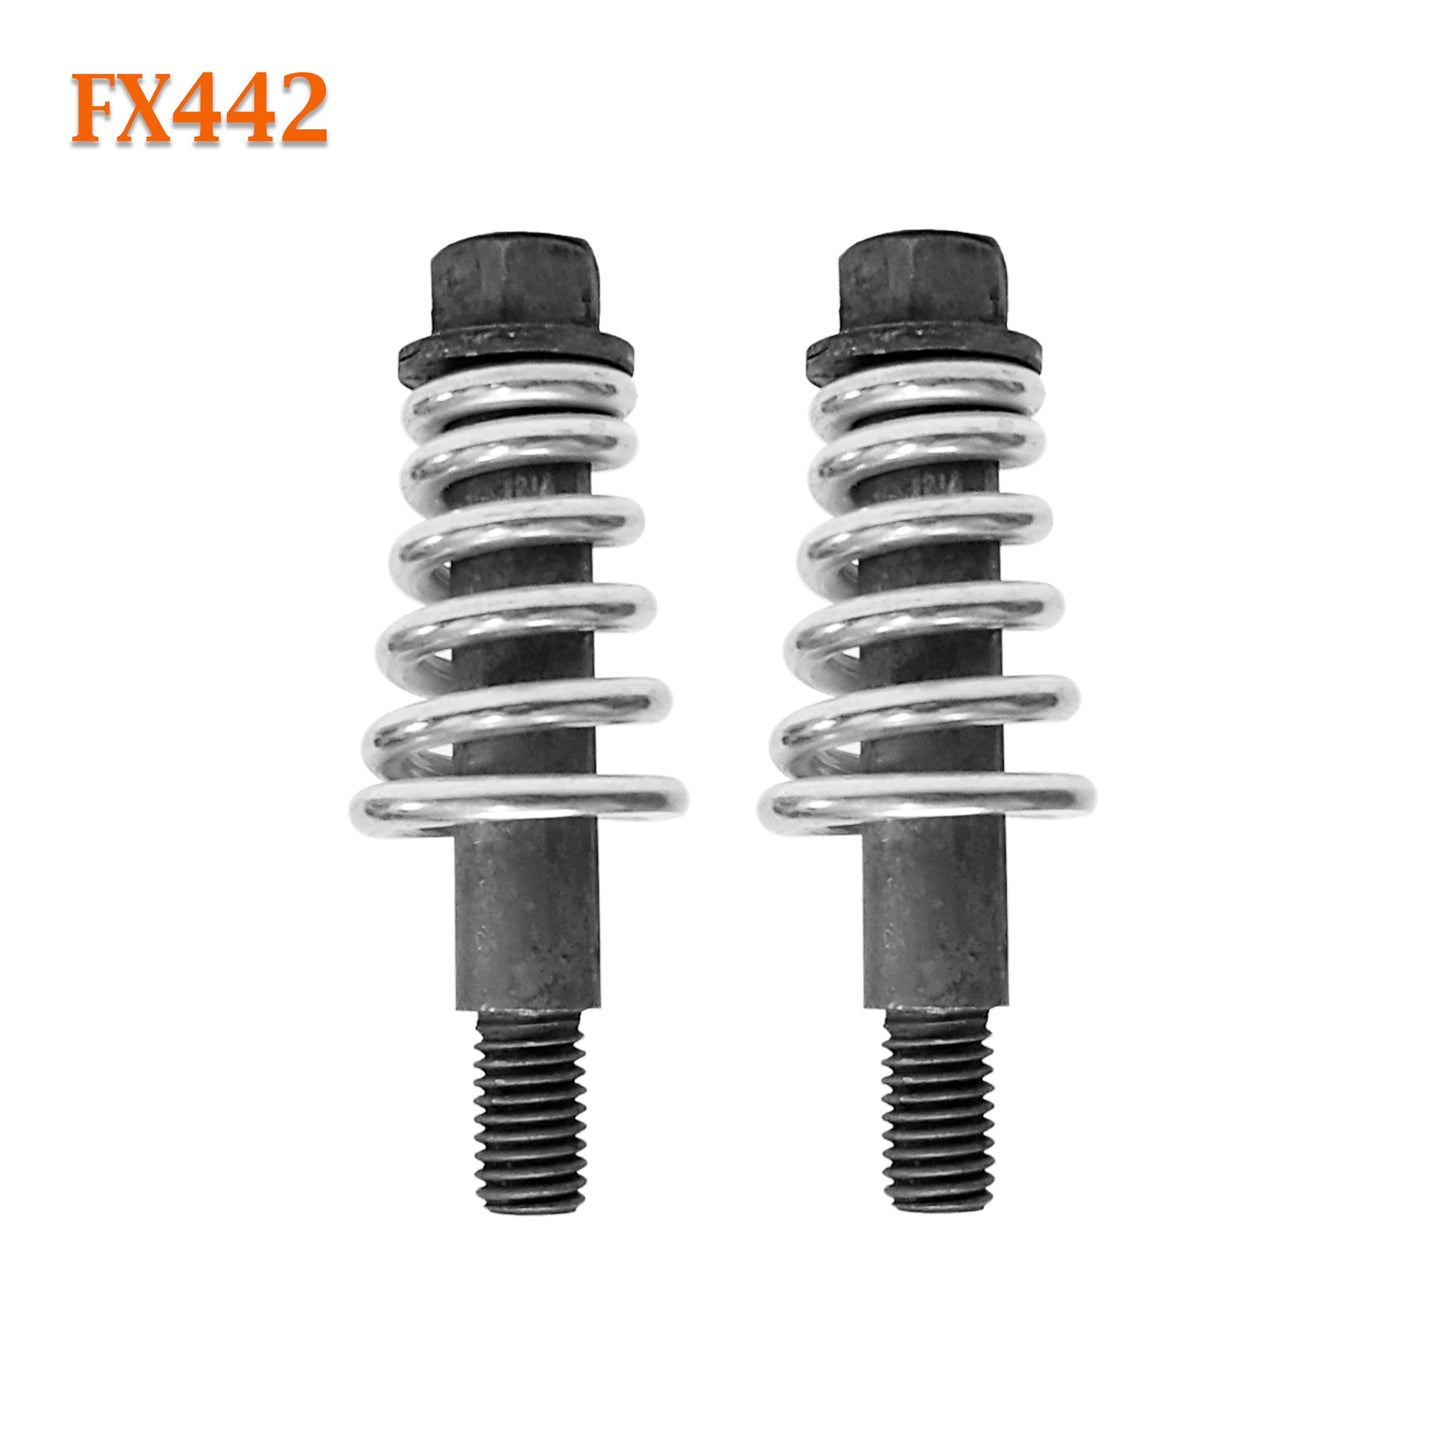 FX442 Exhaust Spring Bolt Shoulder Stud Front Hardware Repair Replacement Kit